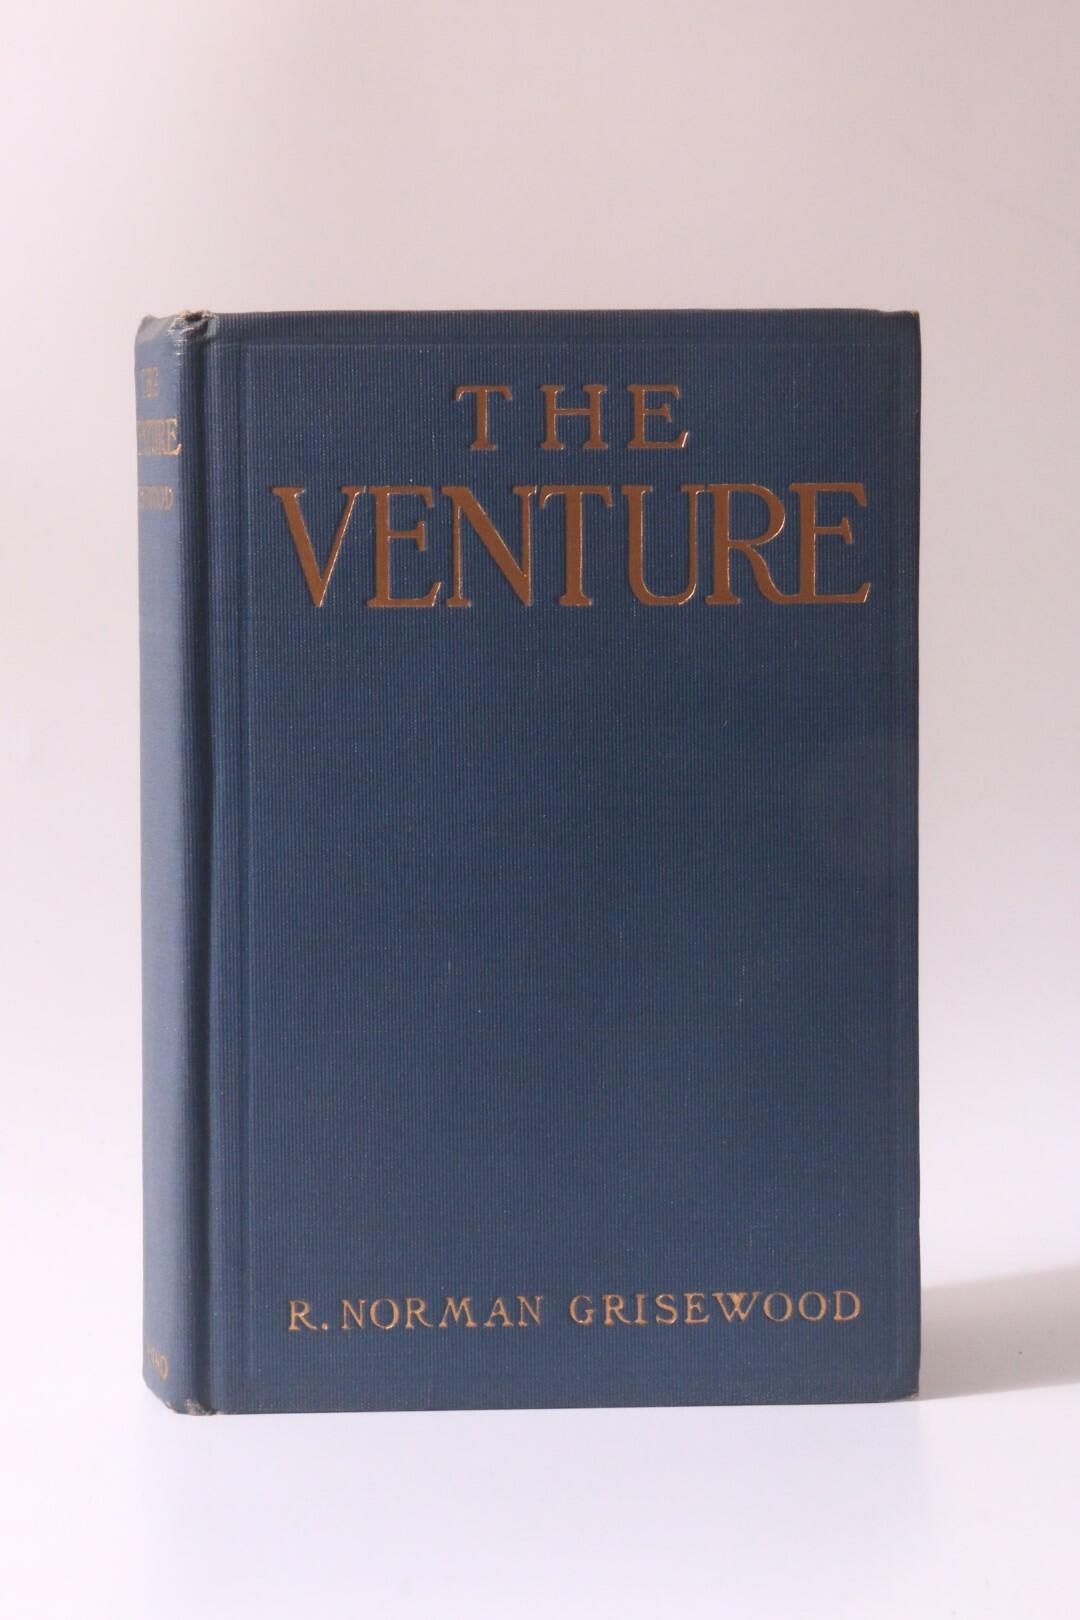 R. Norman Grisewood - The Venture: A Story of the Shadow World - R.F. Femmo & Co., 1911, First Edition.